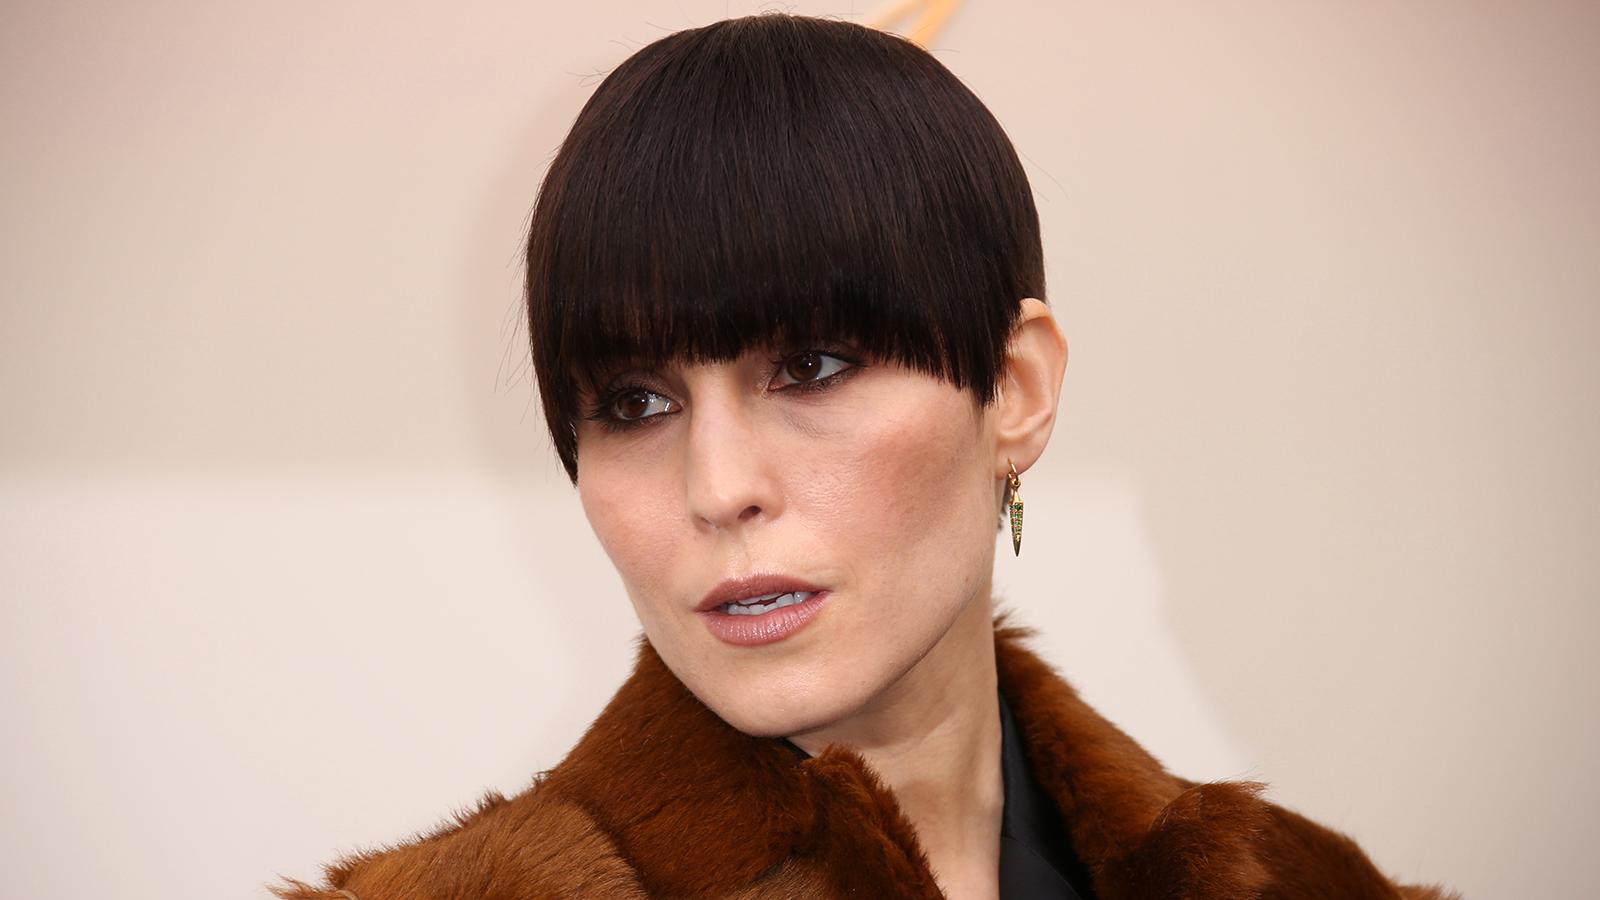 Noomi Rapace.